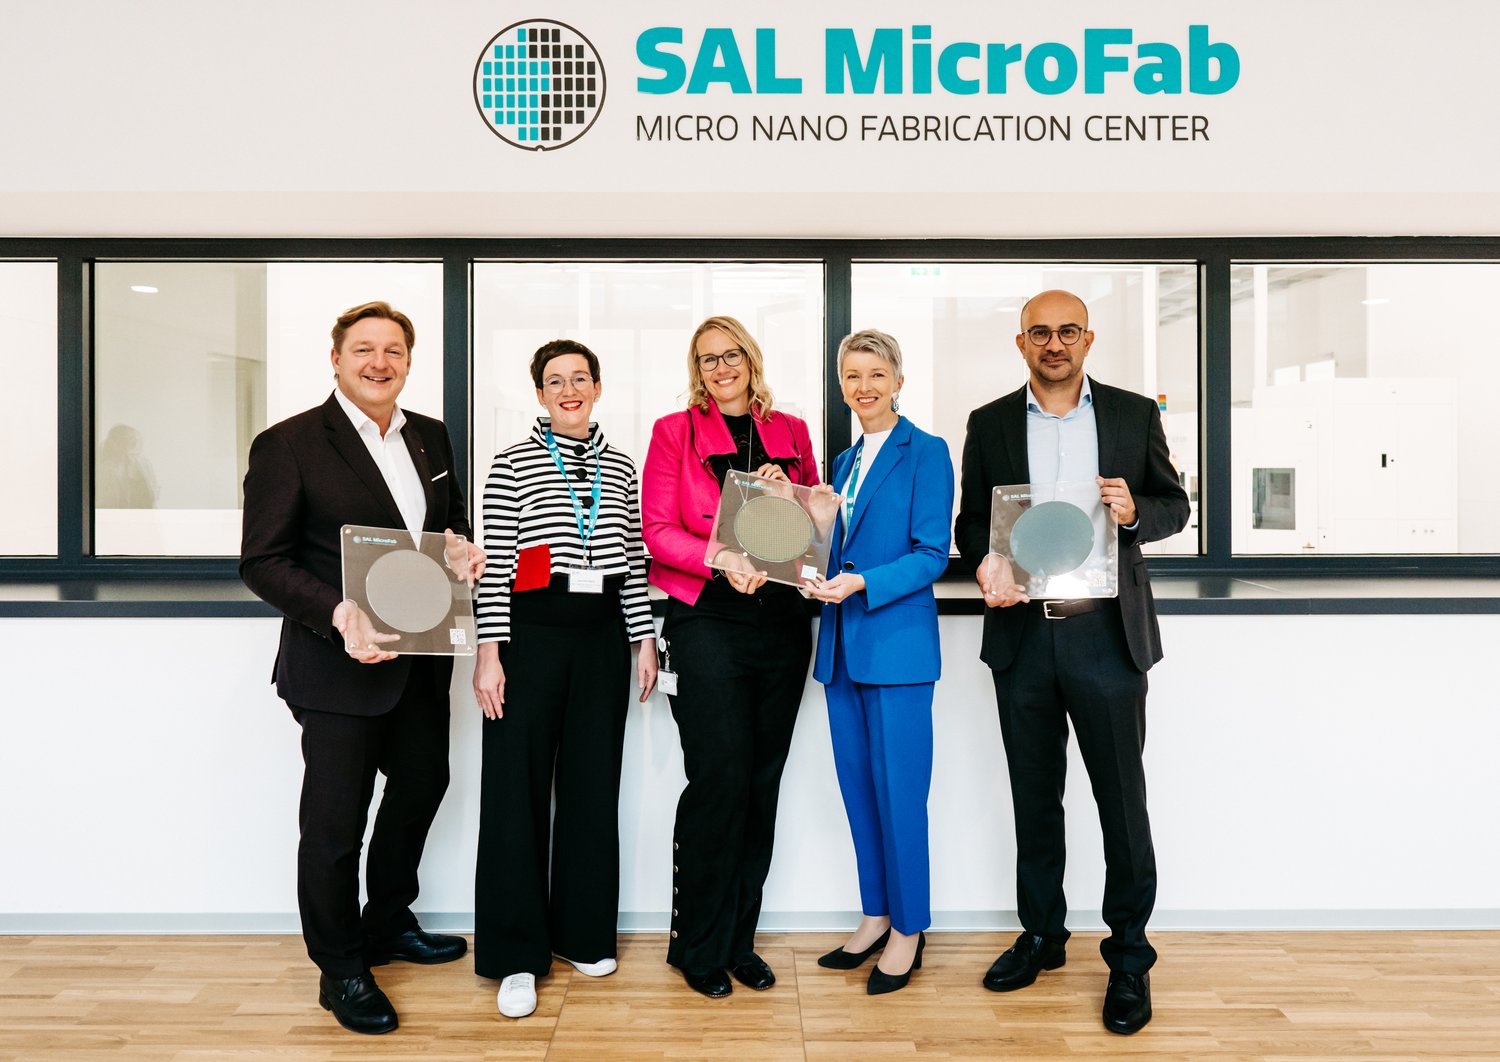 group picture with five people in business attire posing with wafers in their hands. f.l.t.r. Günther Albel (Mayor of Villach), Henriette Spyra (Head of Directorate General III for Innovation and Technology at the Ministry of Climate Action), Christina Hirschl (CEO of SAL), Gaby Schaunig (Deputy Governor Carinthia) und Mohssen Moridi (Head of Microsystems, SAL)